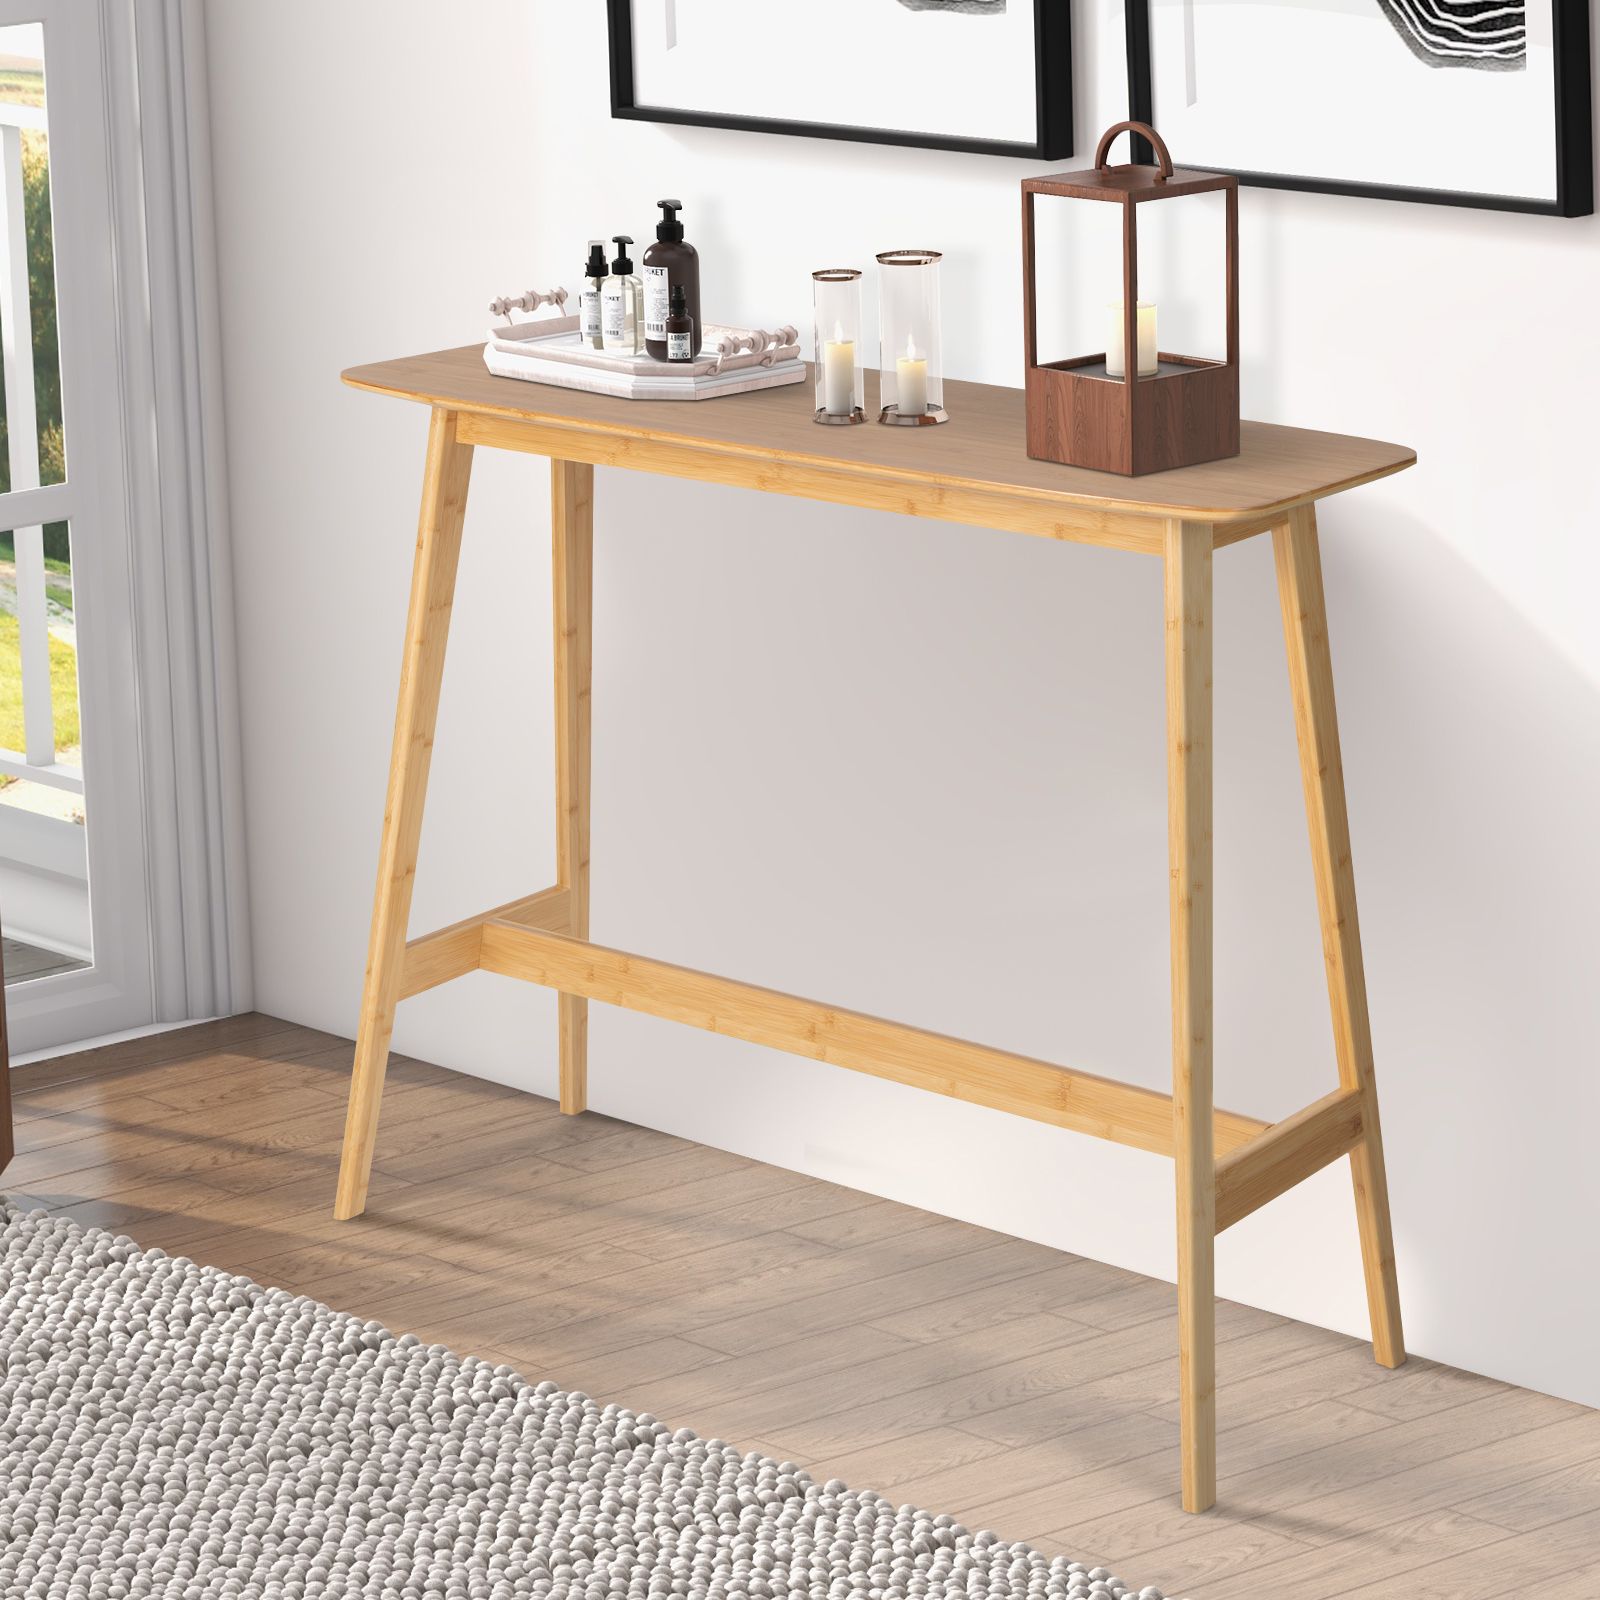 120x45x99cm Bamboo Bar Table with Footrest and Footpads for Home Kitchen